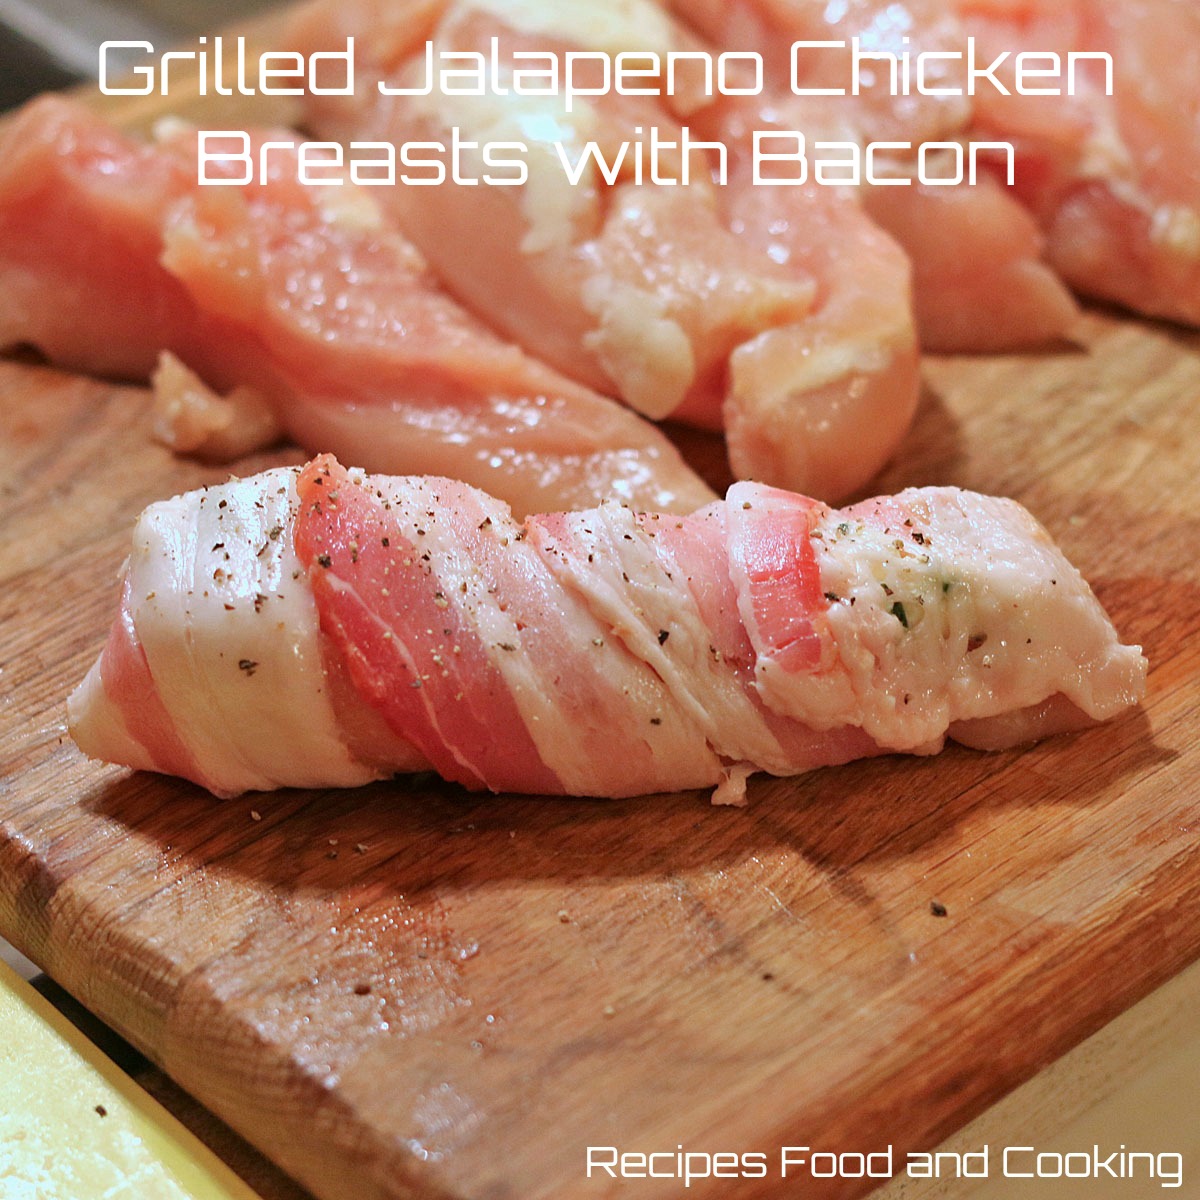 Grilled Jalapeno Chicken Breasts with Bacon